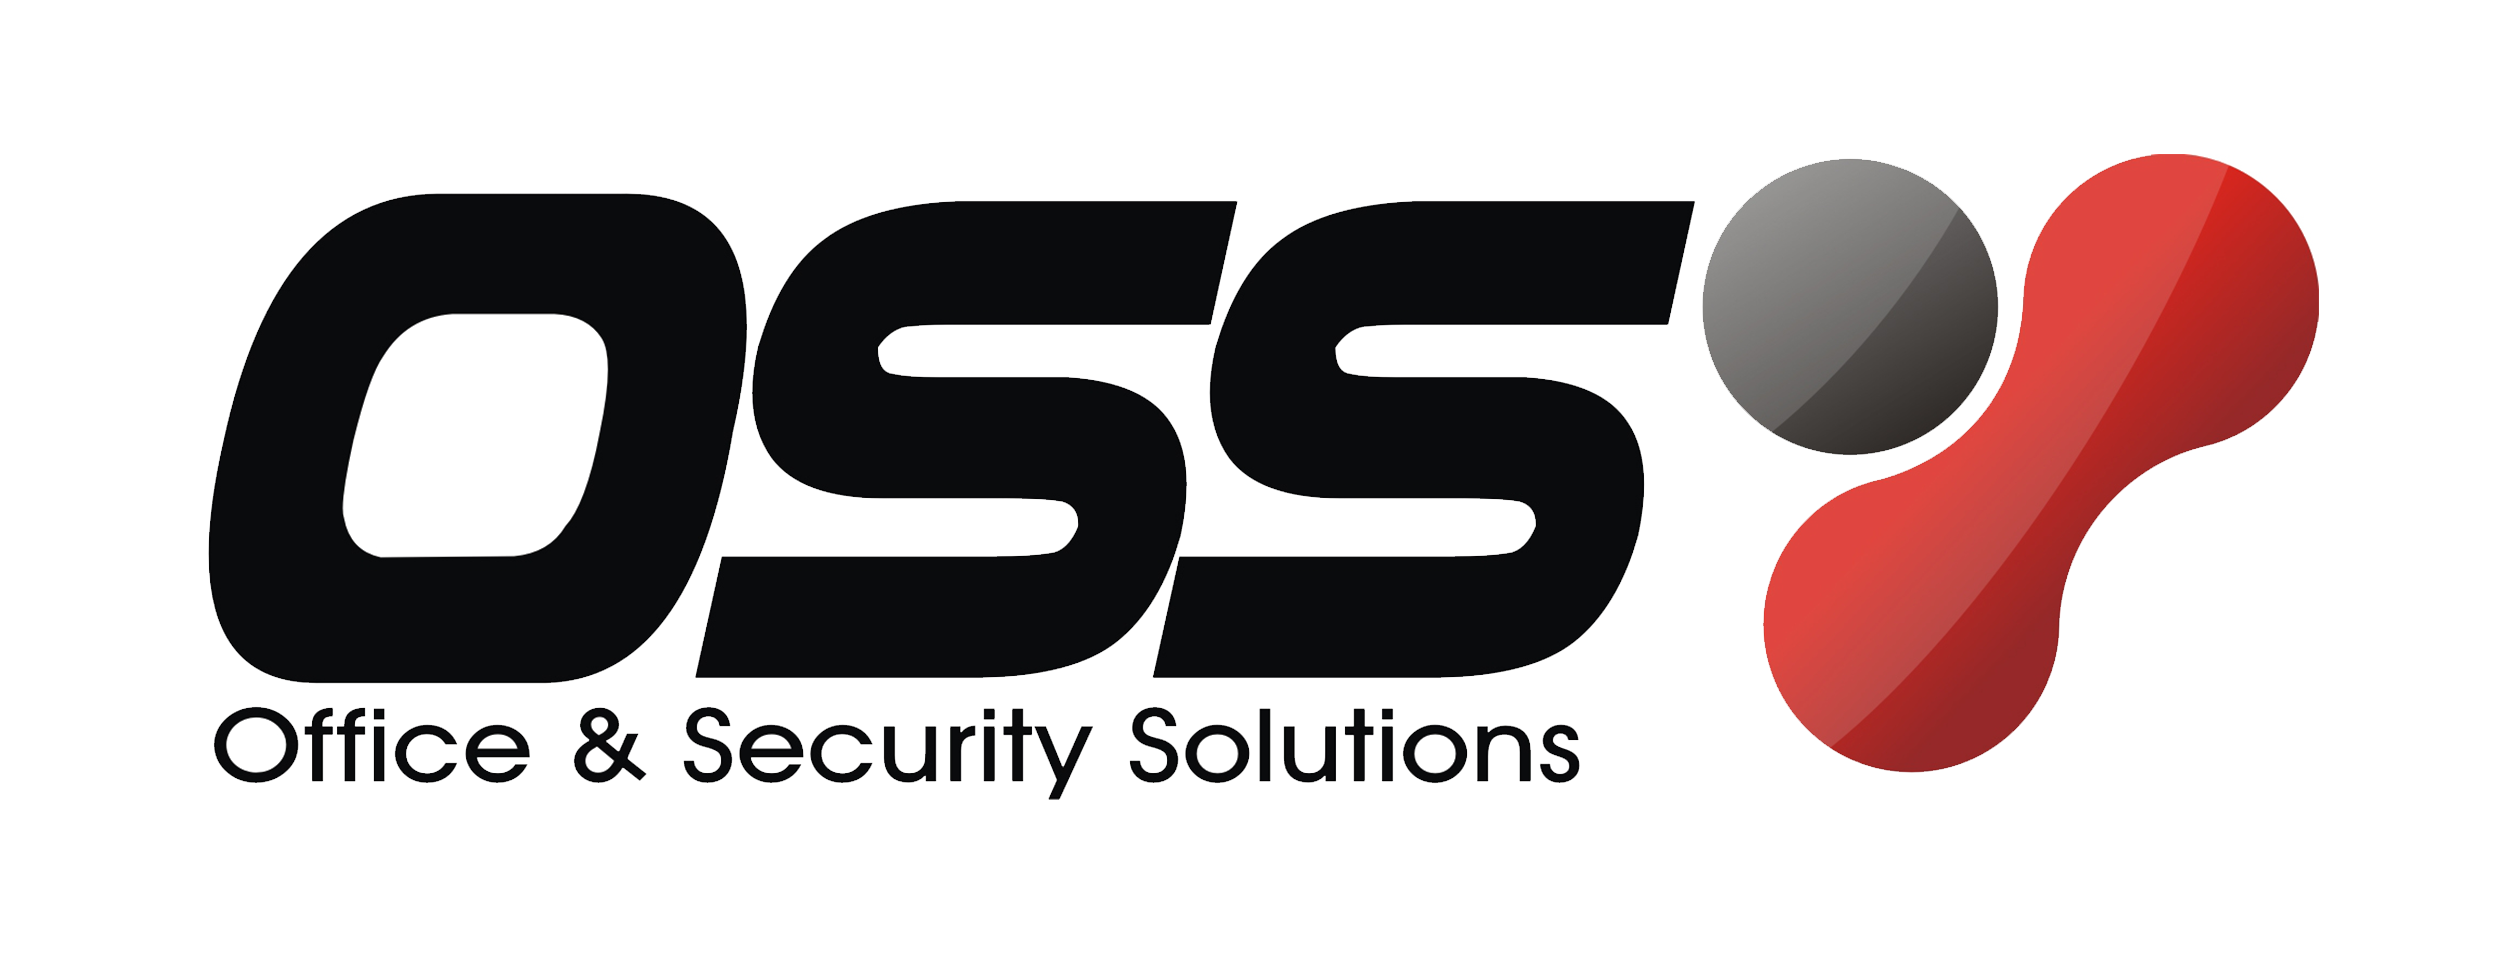 Office & Security Solutions